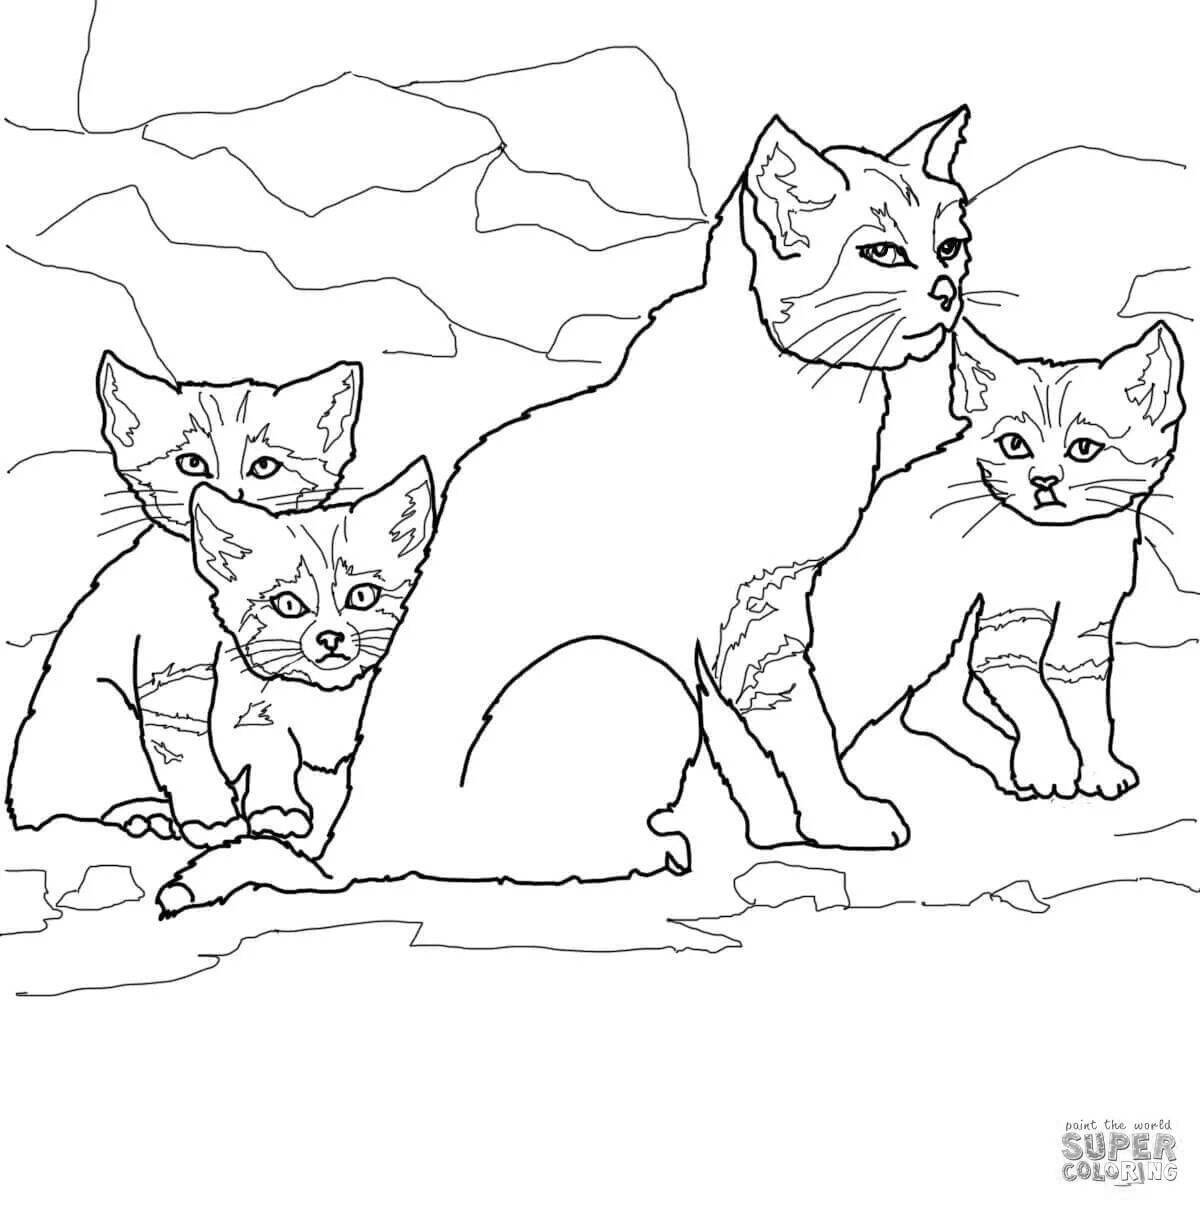 Alert real cat coloring page